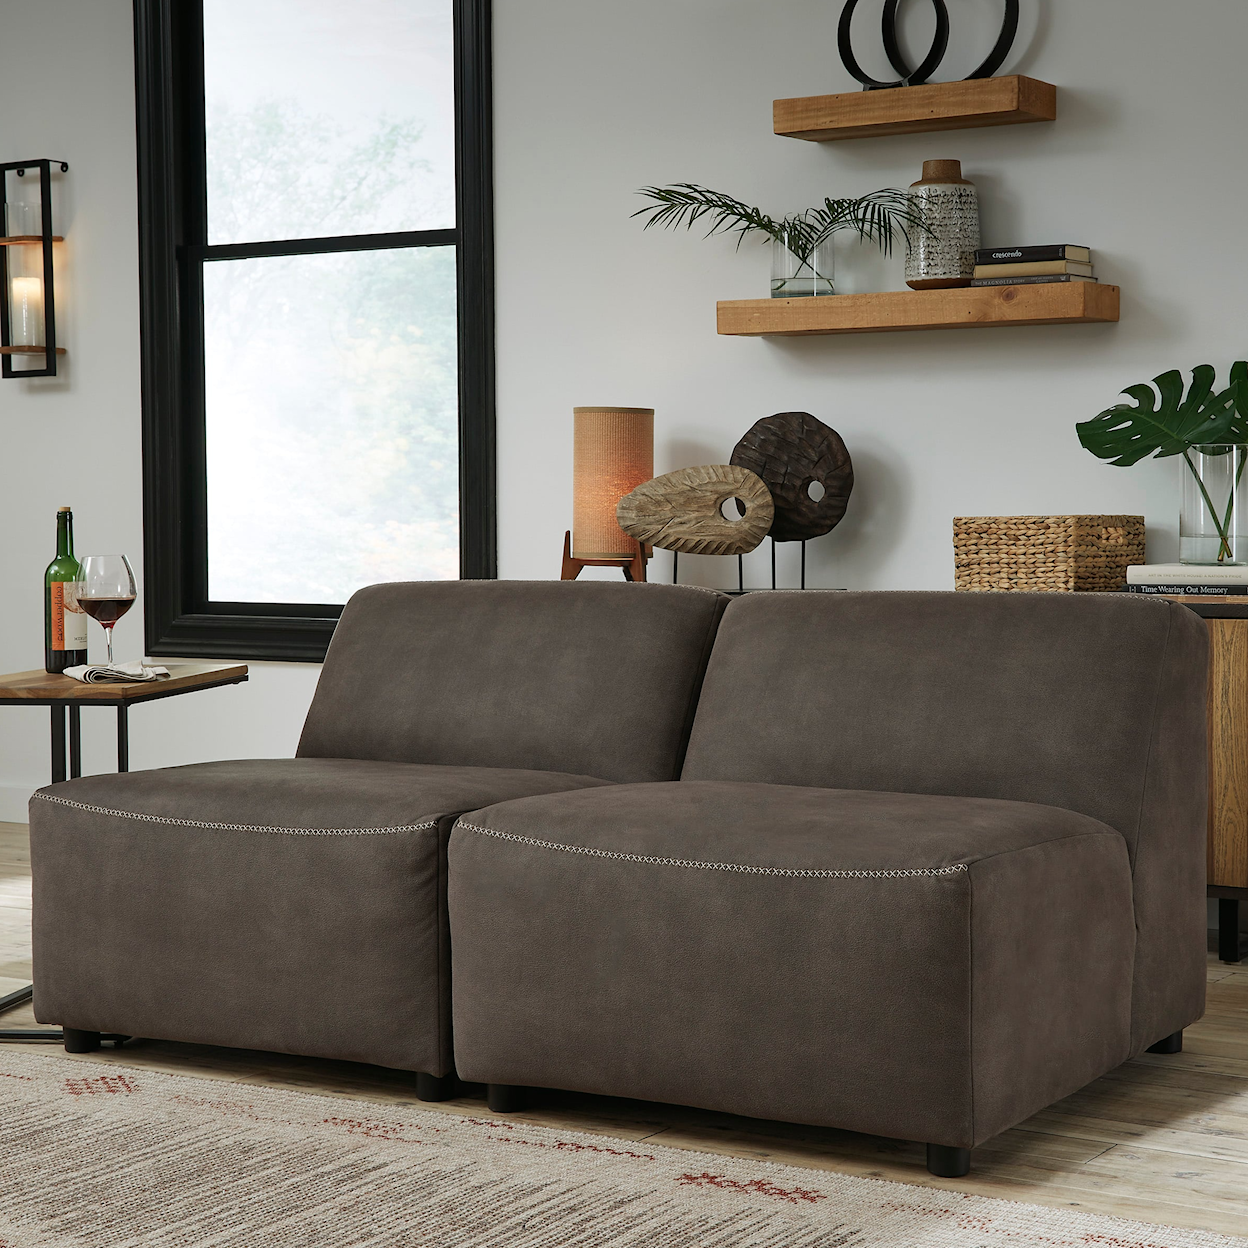 Signature Design by Ashley Allena 2-Piece Armless Loveseat